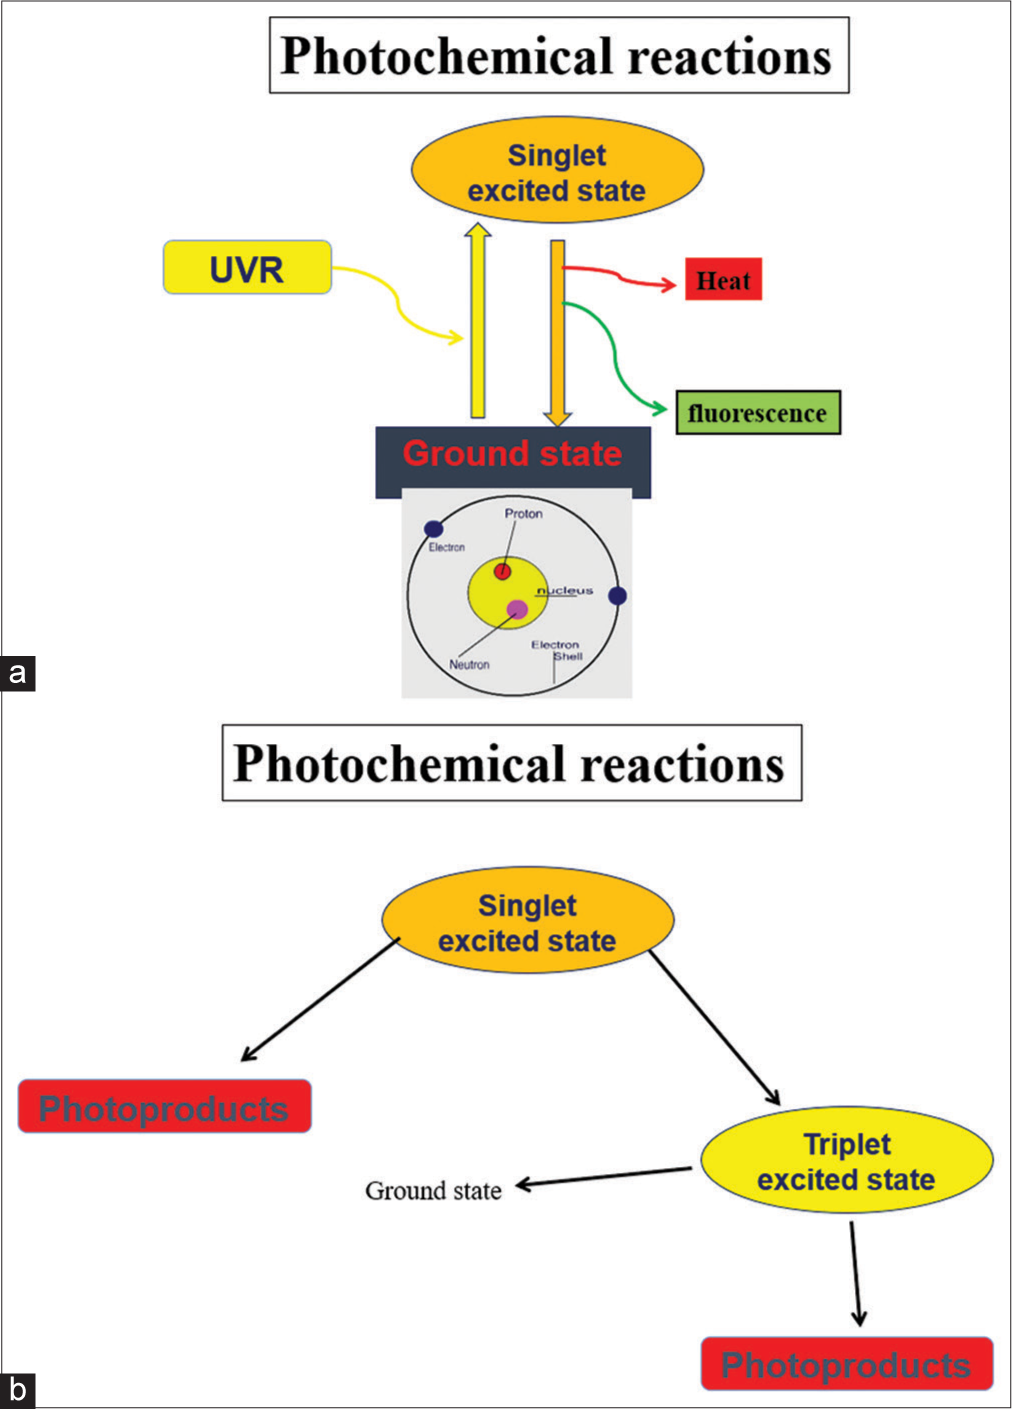 (a and b) Mechanism of photoexcitation. UVR: Ultraviolet radiation.